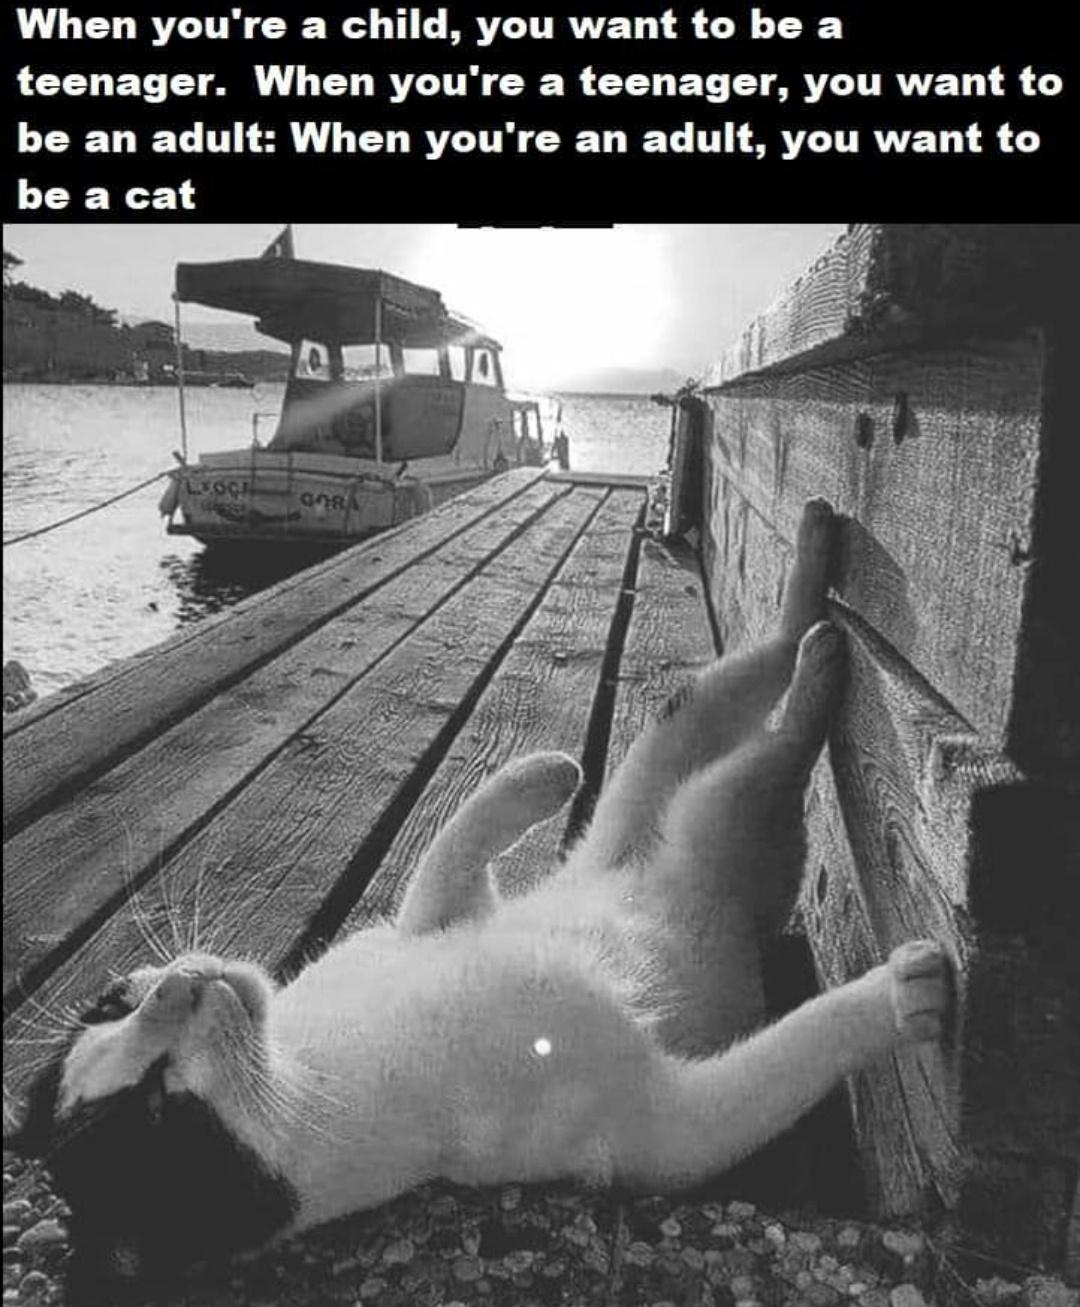 When you're a child, you want to be a teenager. When you're a teenager, you want to be an adult When you're an adult, you want to be a cat Logi 008